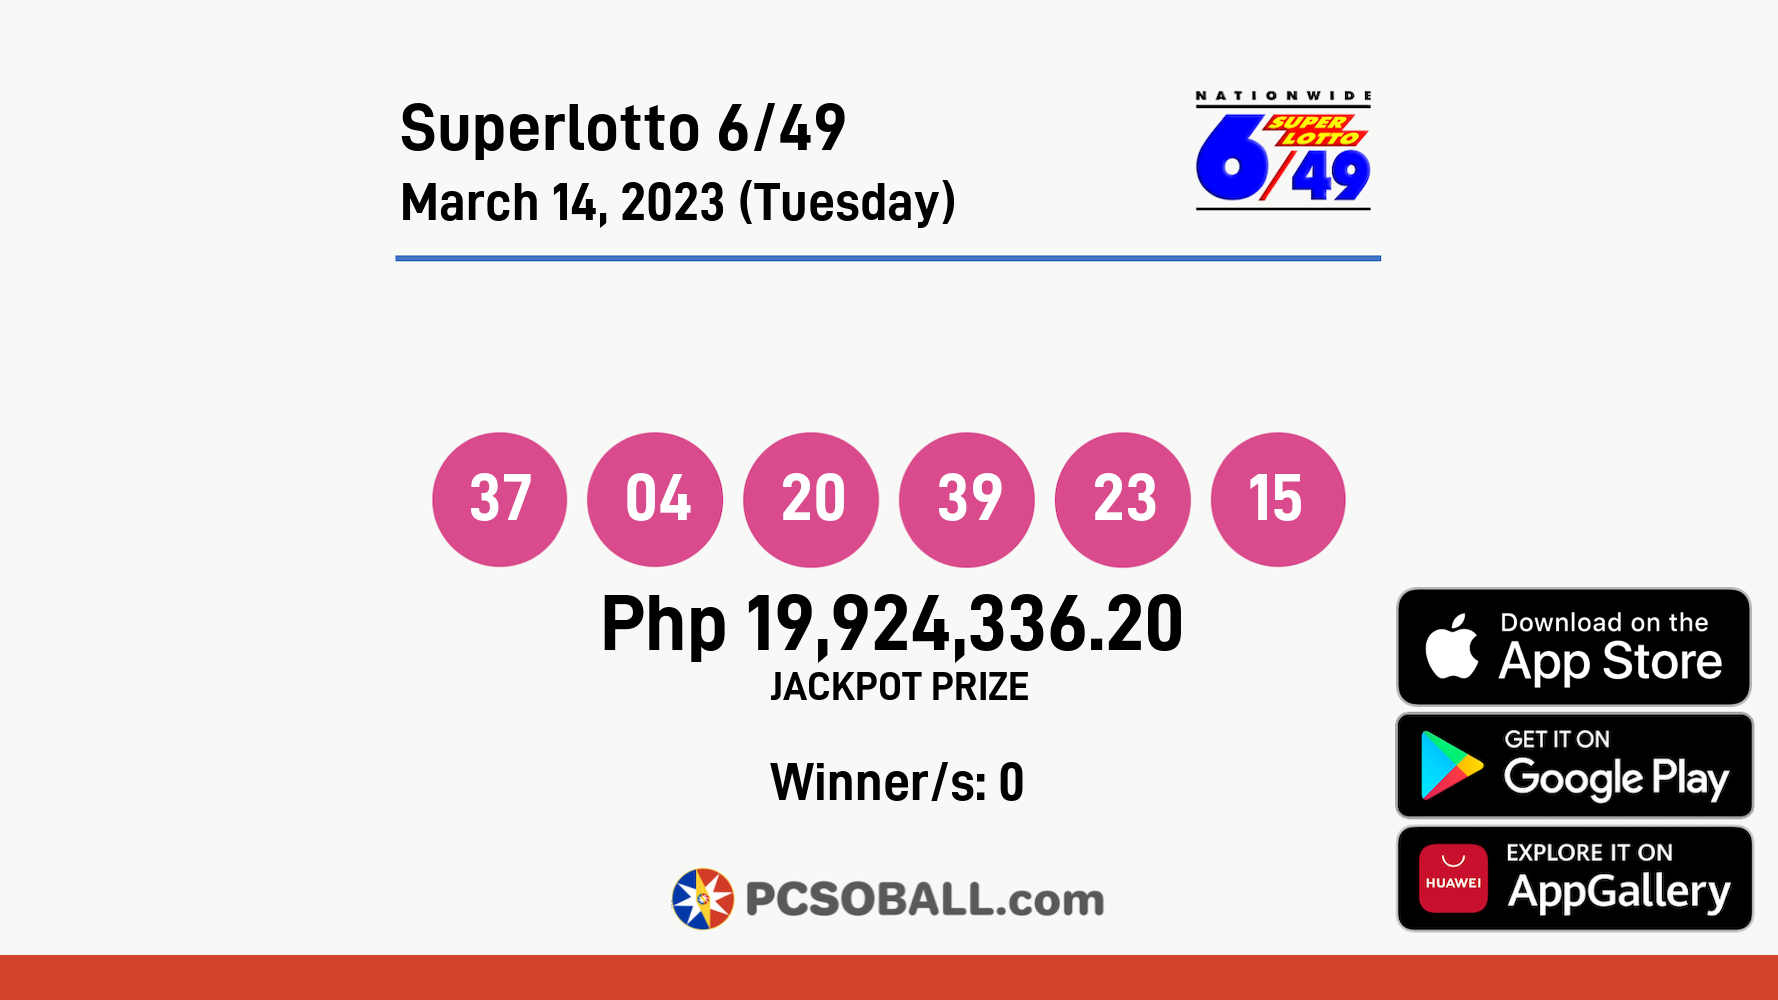 Superlotto 6/49 March 14, 2023 (Tuesday) Result